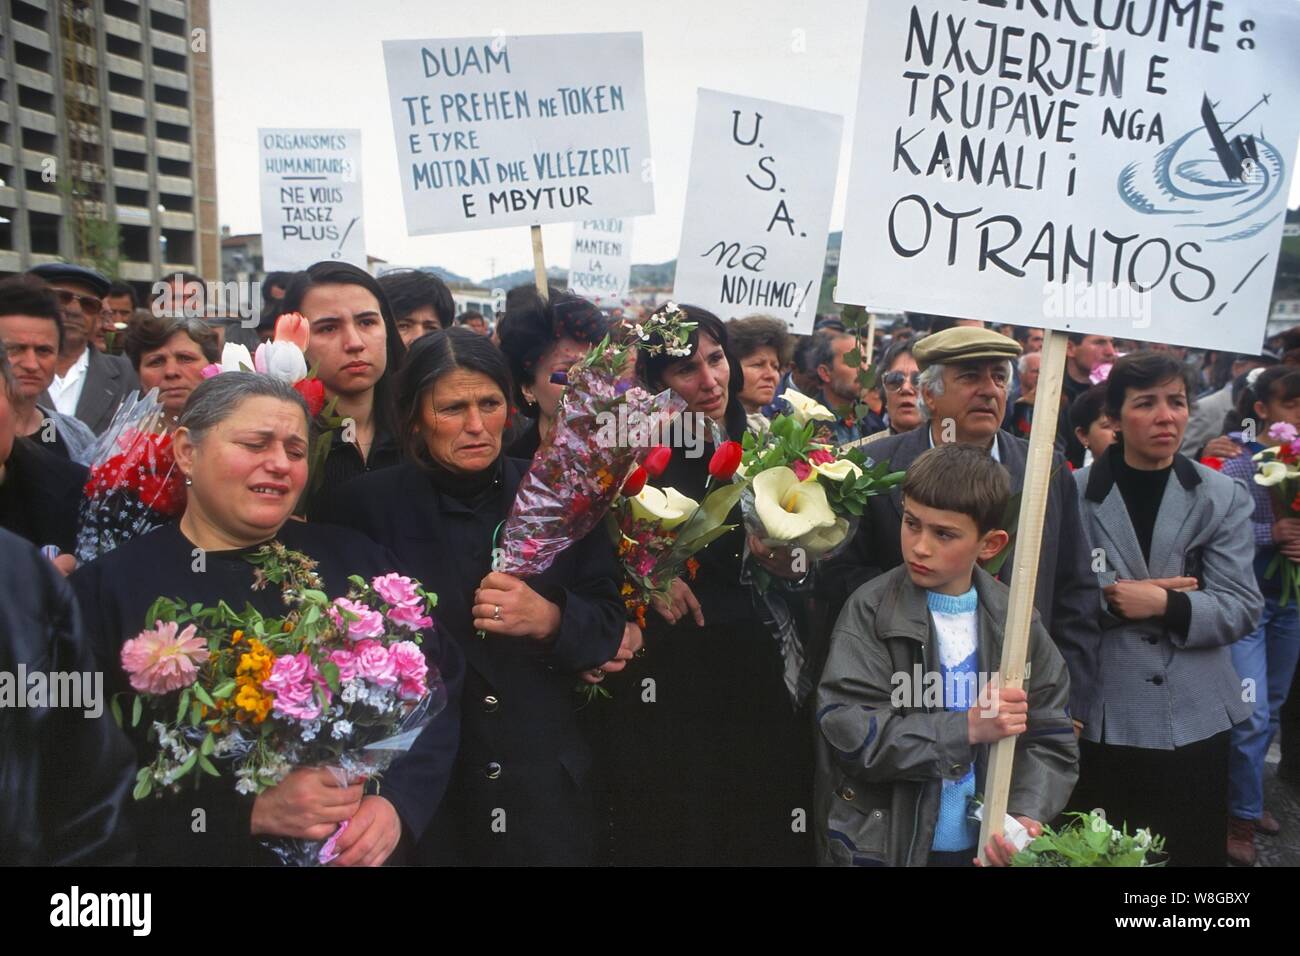 Albania, Vlora, April 1997, demonstration in memory of the tragedy of the Otranto Canal (28 March 1997), when the Italian military ship Sibilla accidentally rammed the Albanian patrol boat Katër i Radës loaded with refugees escaping from the civil war, causing about 83 deaths and missing. Stock Photo